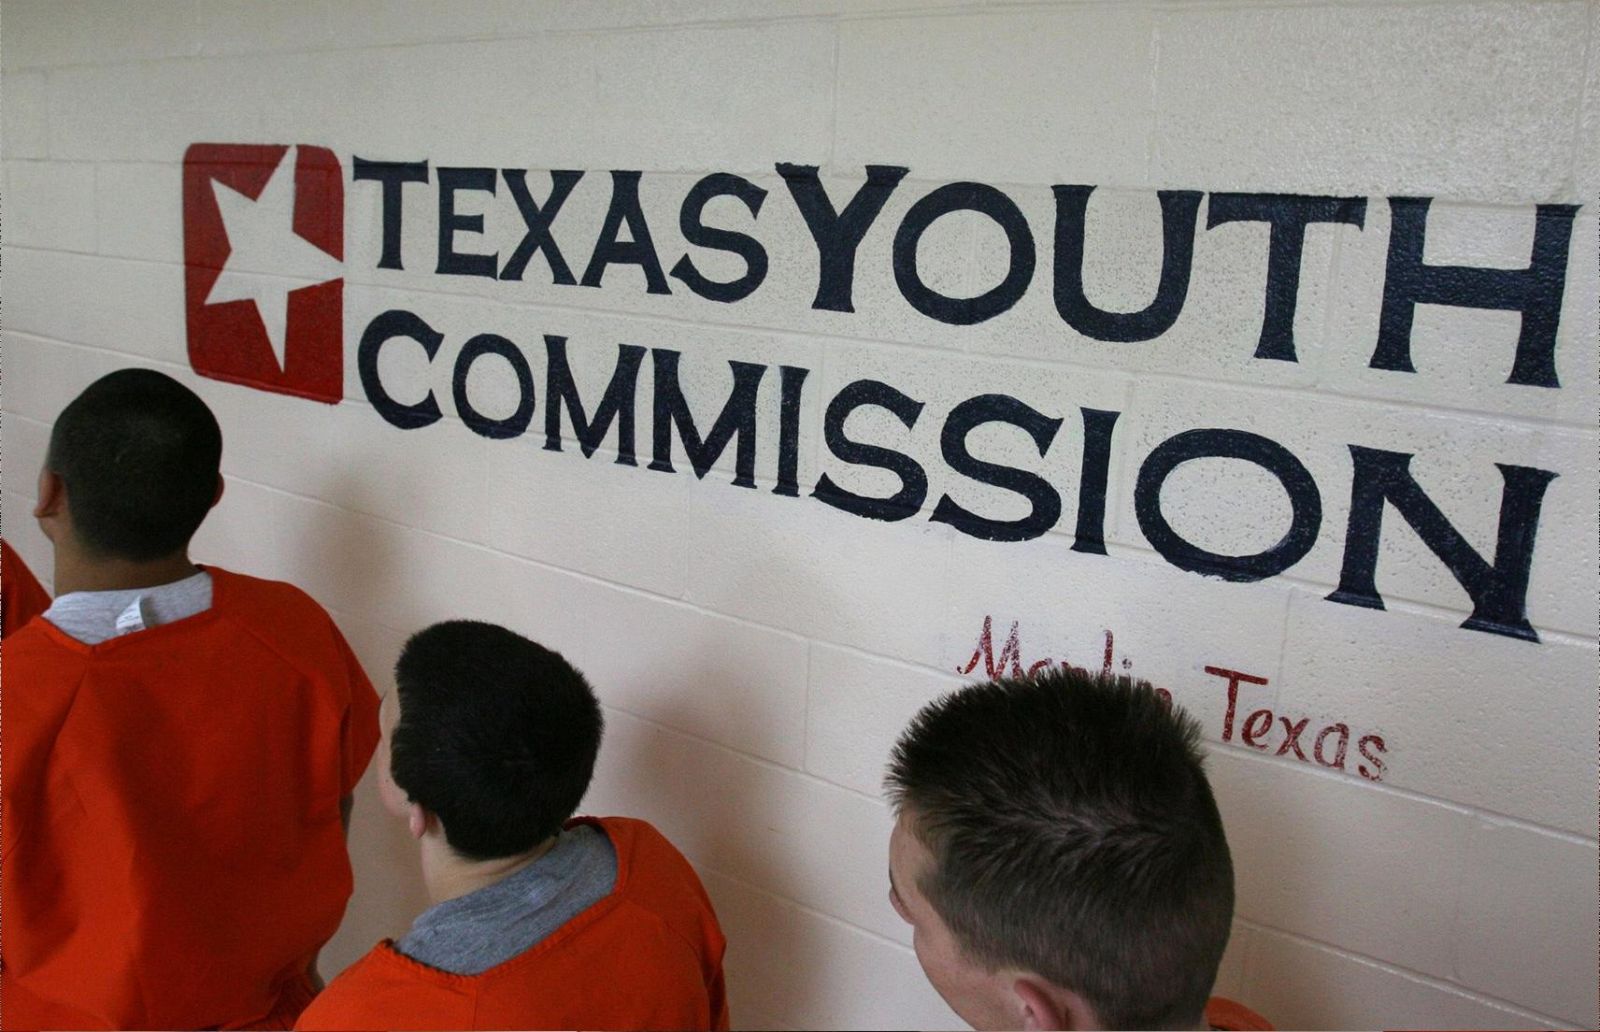 Texas youth commission